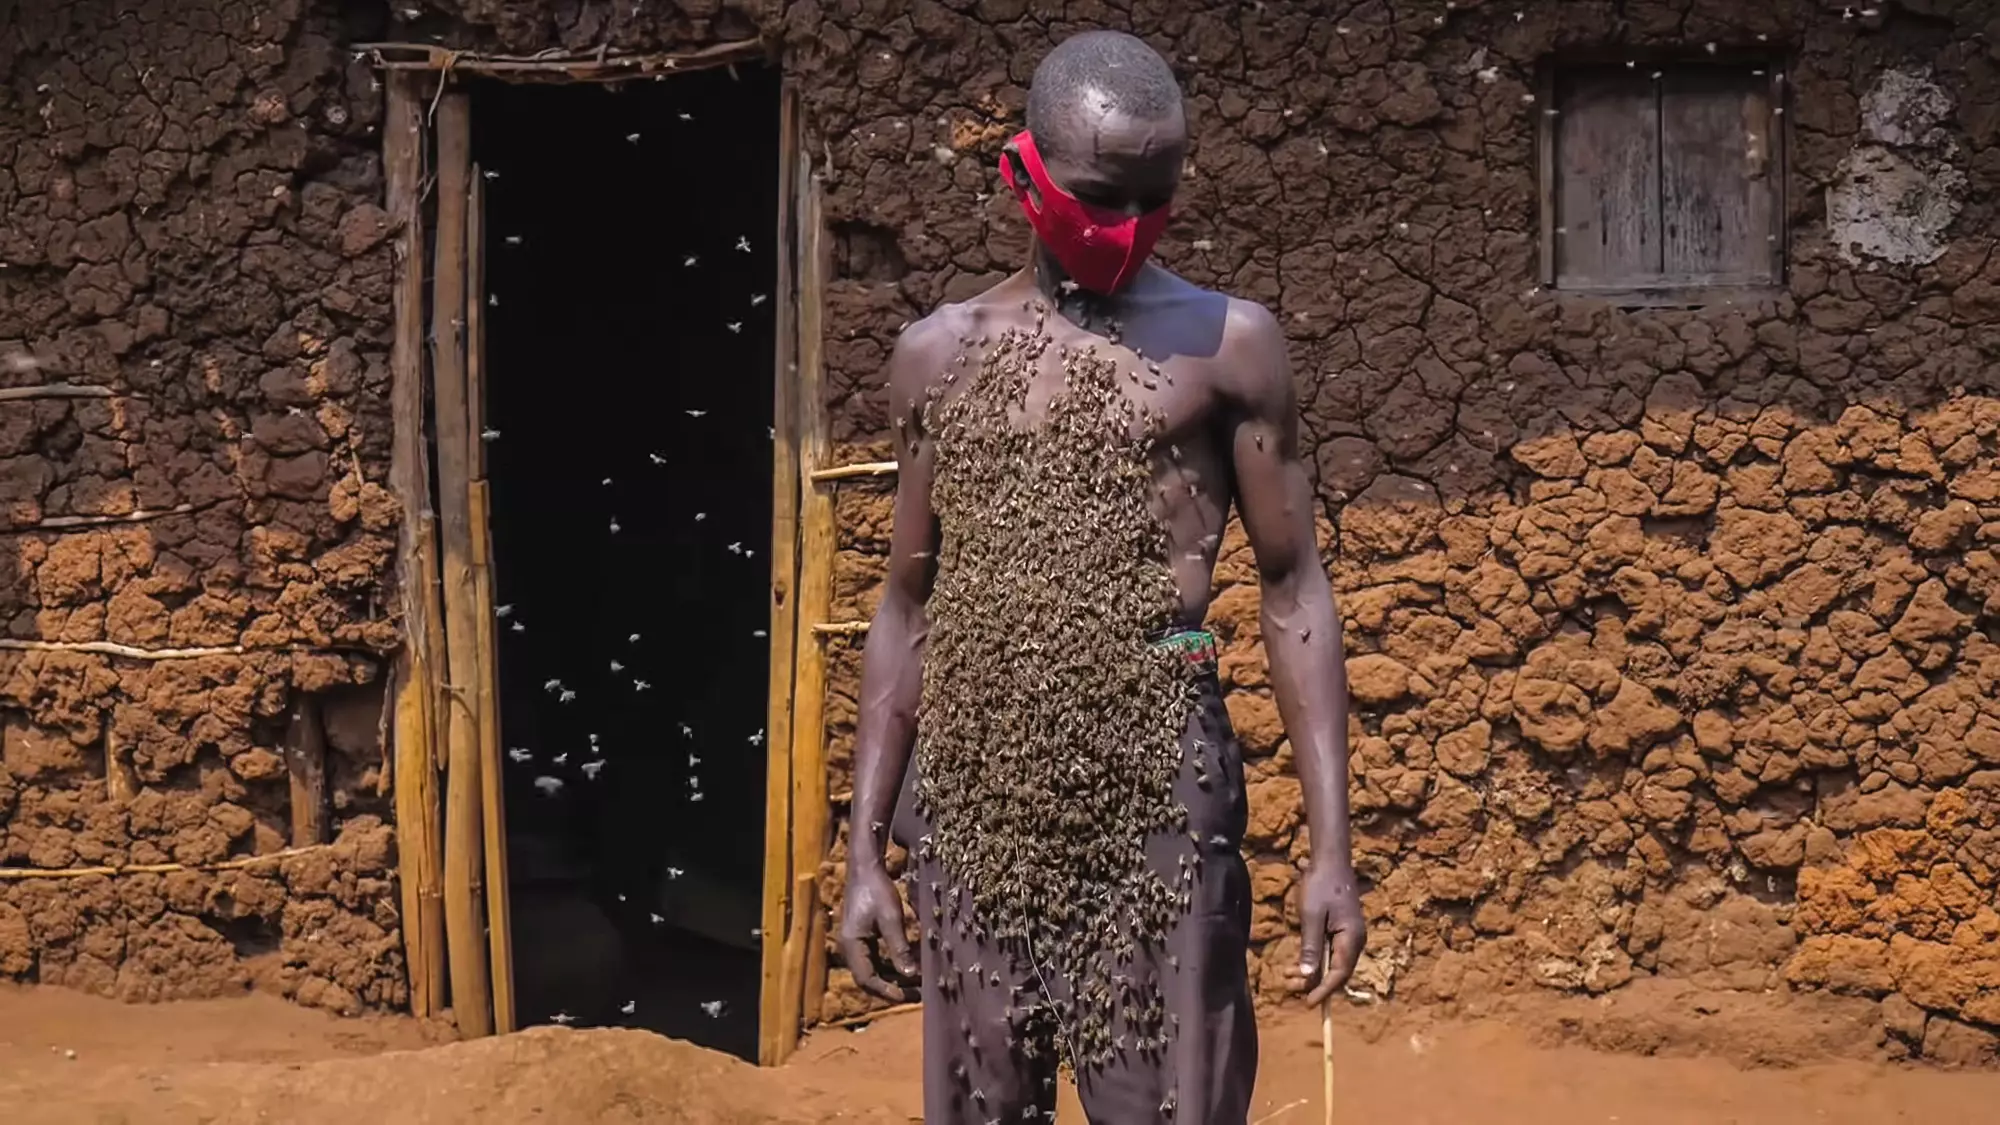 'King Of Bees' With Swarm Around His Body Claims He's Never Been Stung